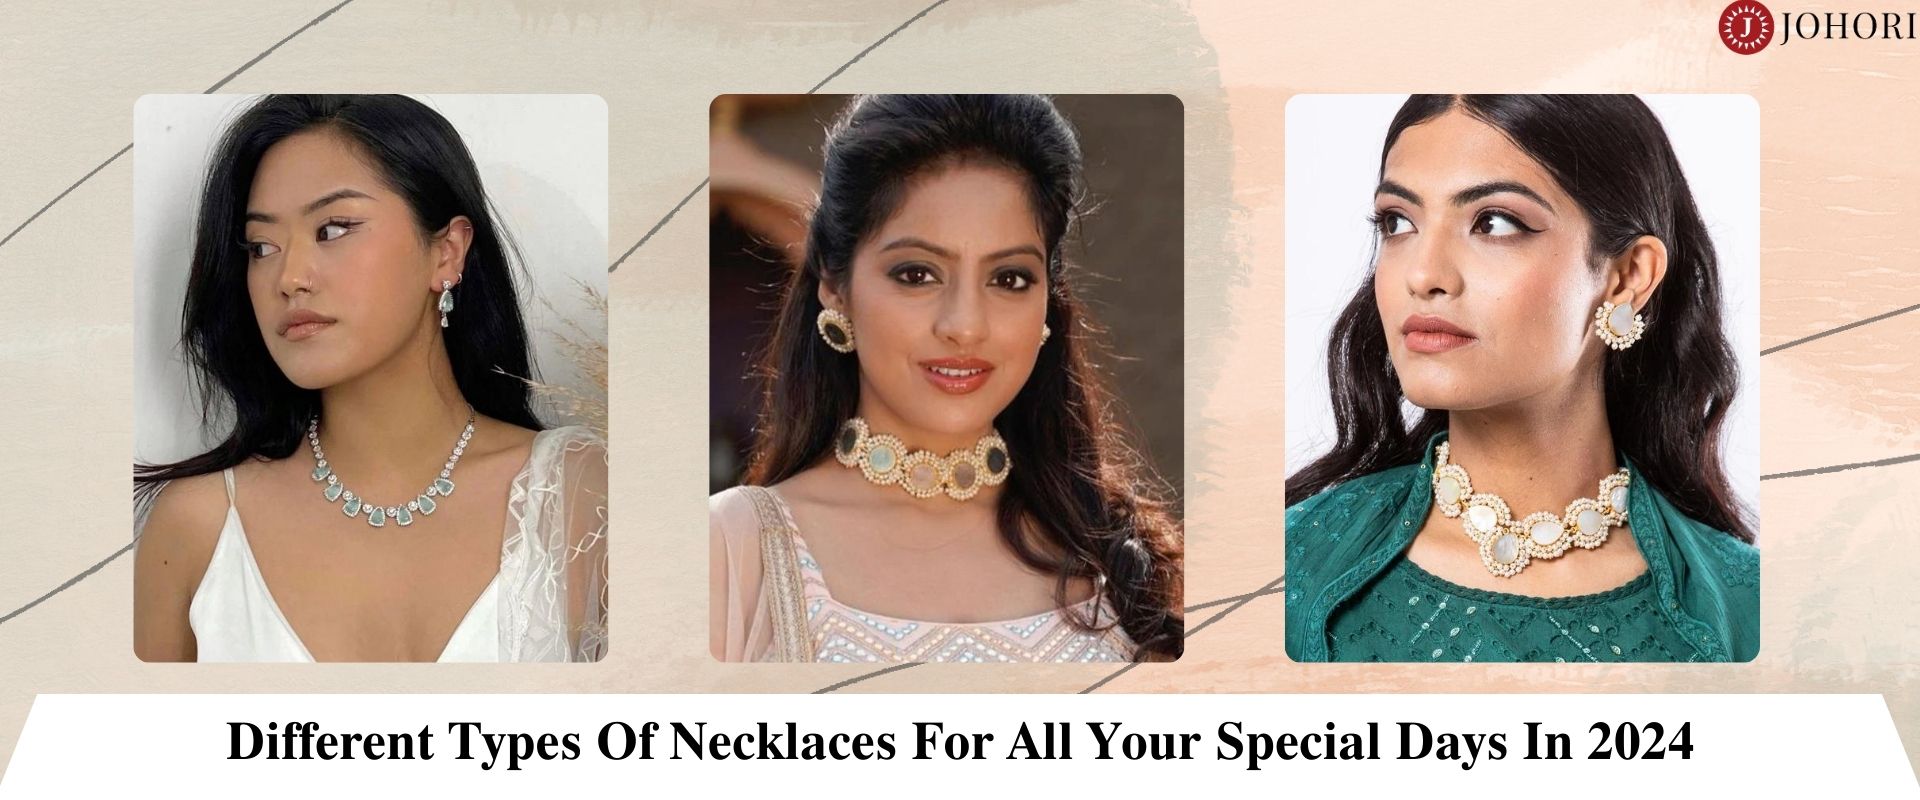 Different Types Of Necklaces For All Your Special Days In 2024